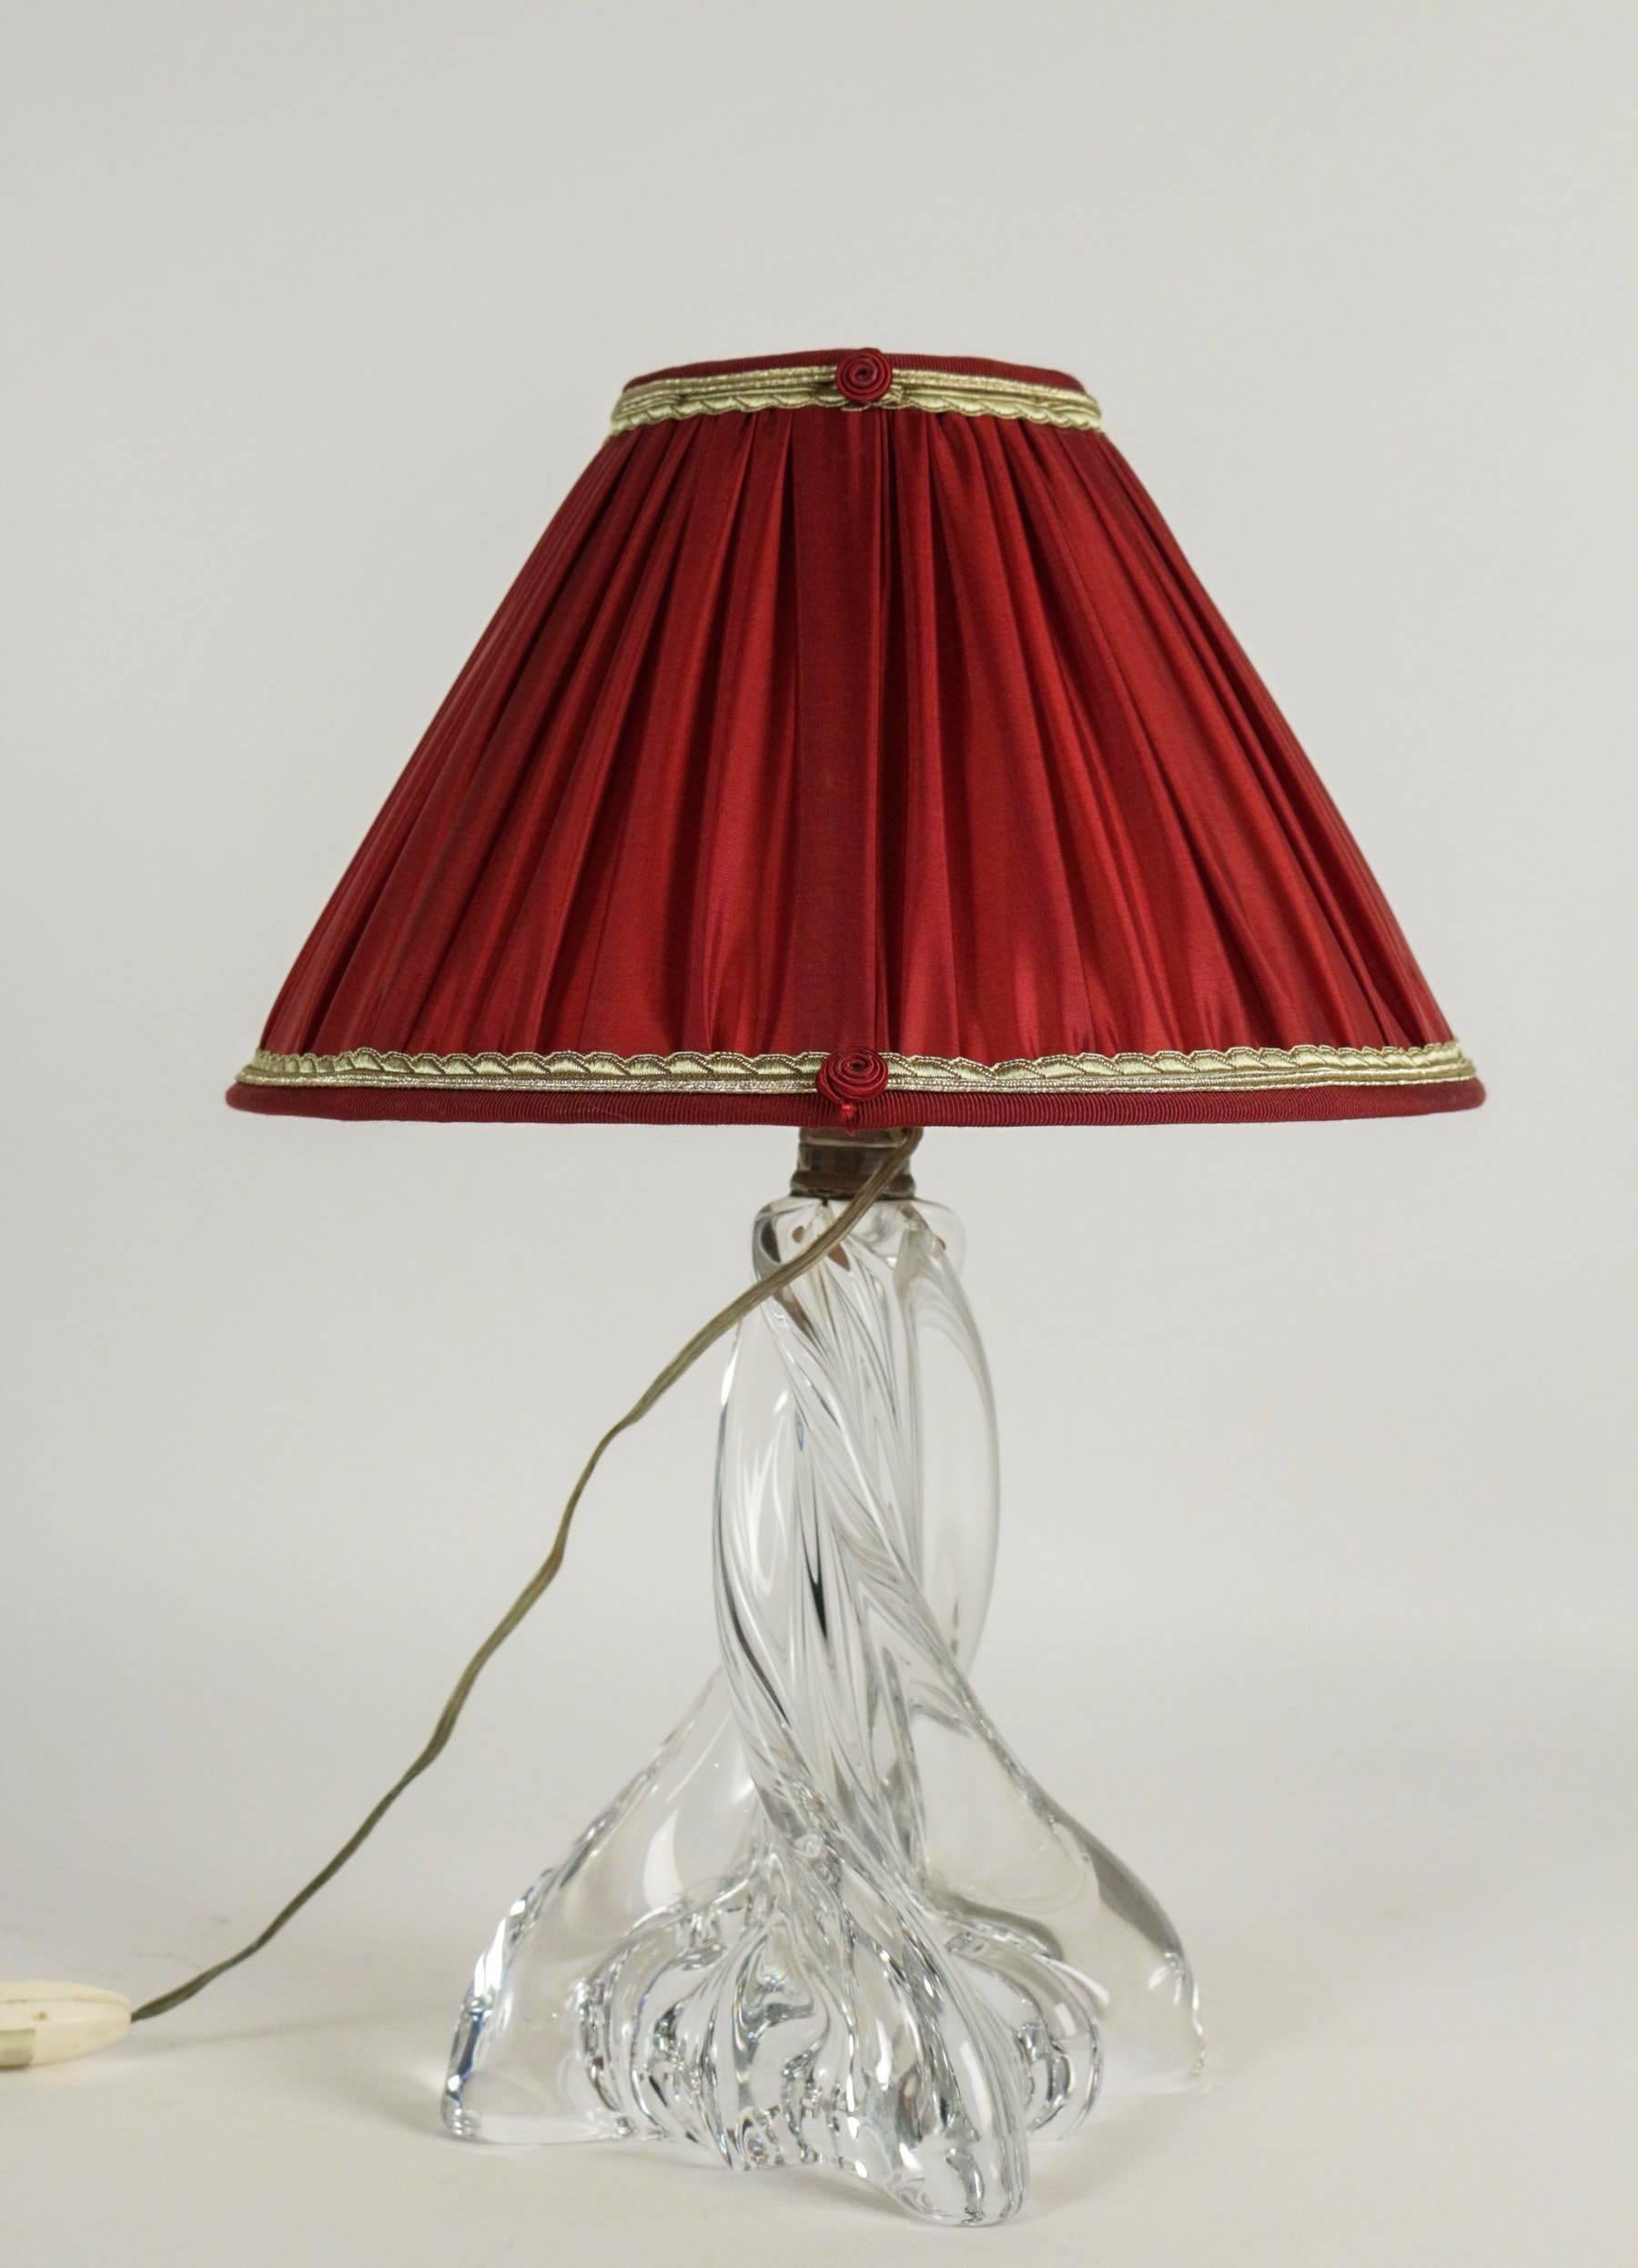 Lovely and fine spiral hand-cut crystal shape lamp signed on base by Maison Baccarat.
New French pleated red and gold silk shade.
Lovely work late 20th century, circa 1970.
Dimensions: 10.62 in. H shadeless-7.08 in. base diameter-14.96 in. H with